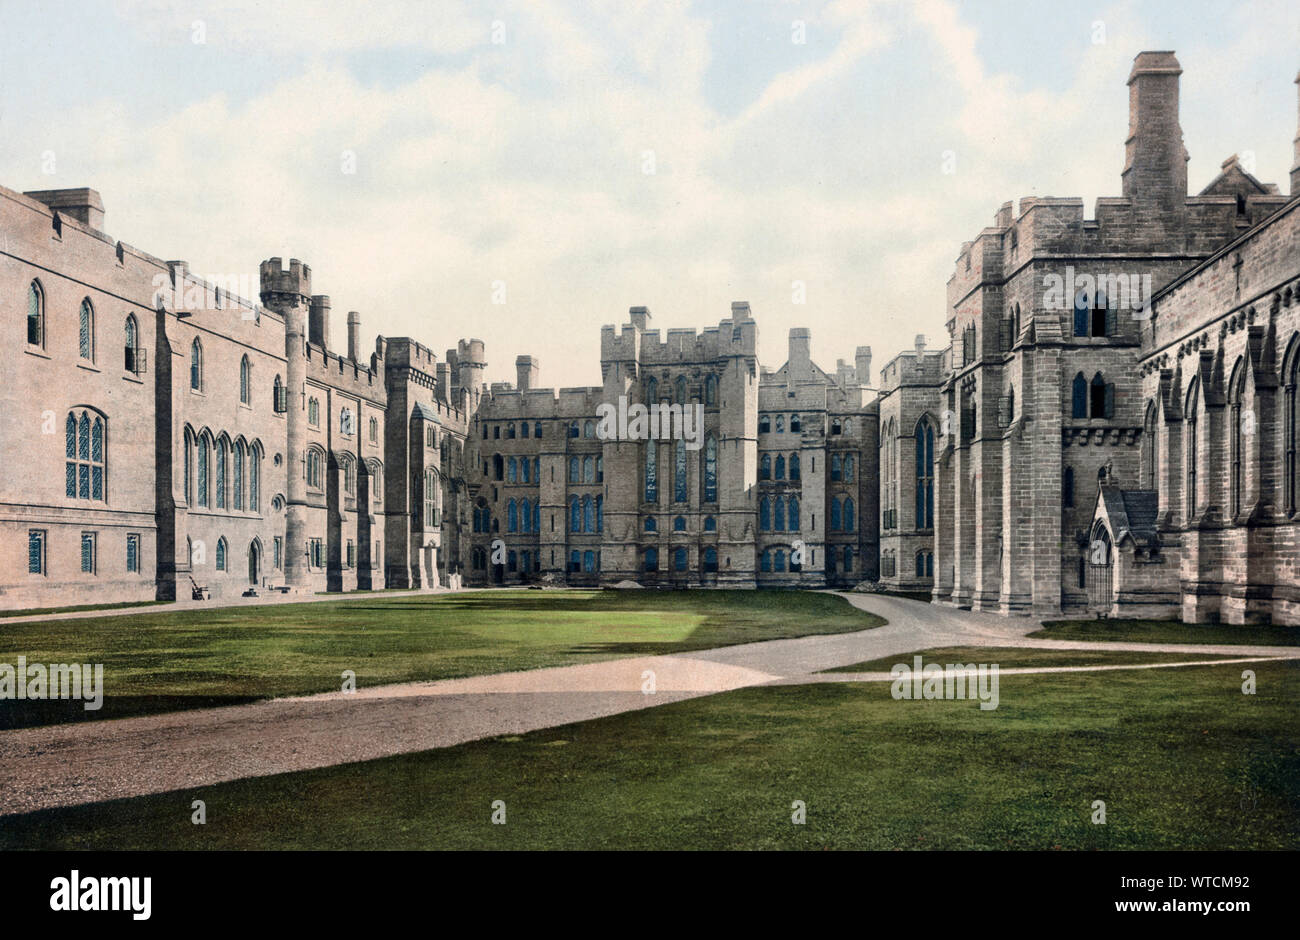 England. Great Britain. Arundel Castle. The Quadrangle. Arundel Castle is a restored and remodelled medieval castle in Arundel, West Sussex, England. Stock Photo